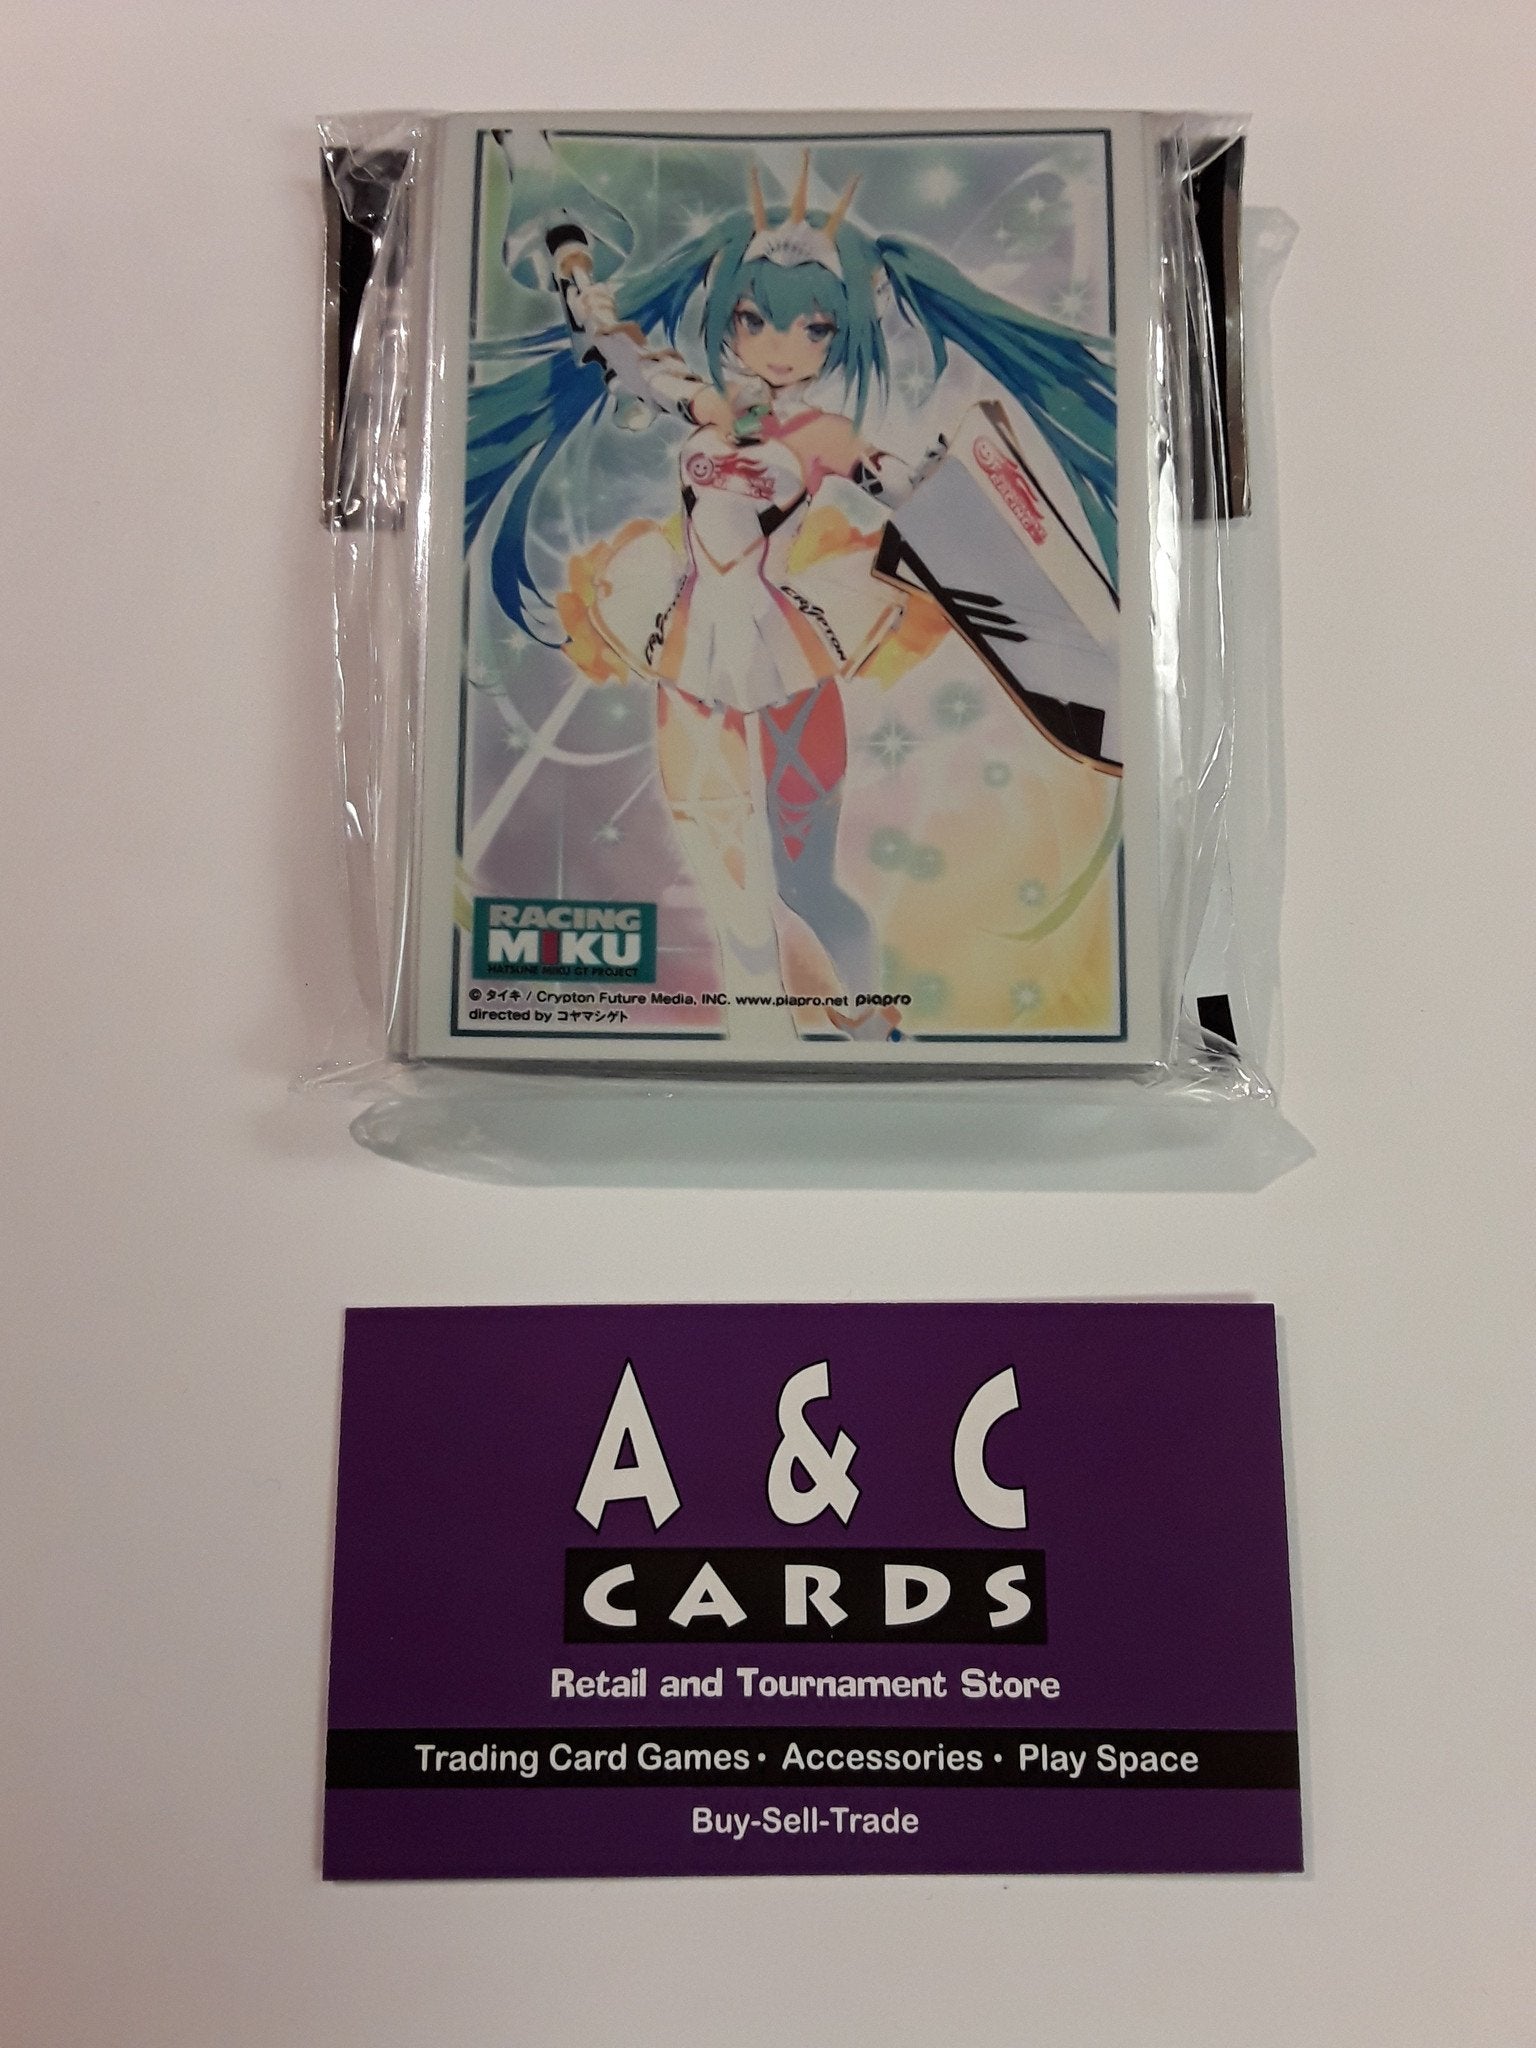 Character Sleeves "Hatsune Miku" #2 - 1 pack of Standard Size Sleeves 60pc. - Project Diva